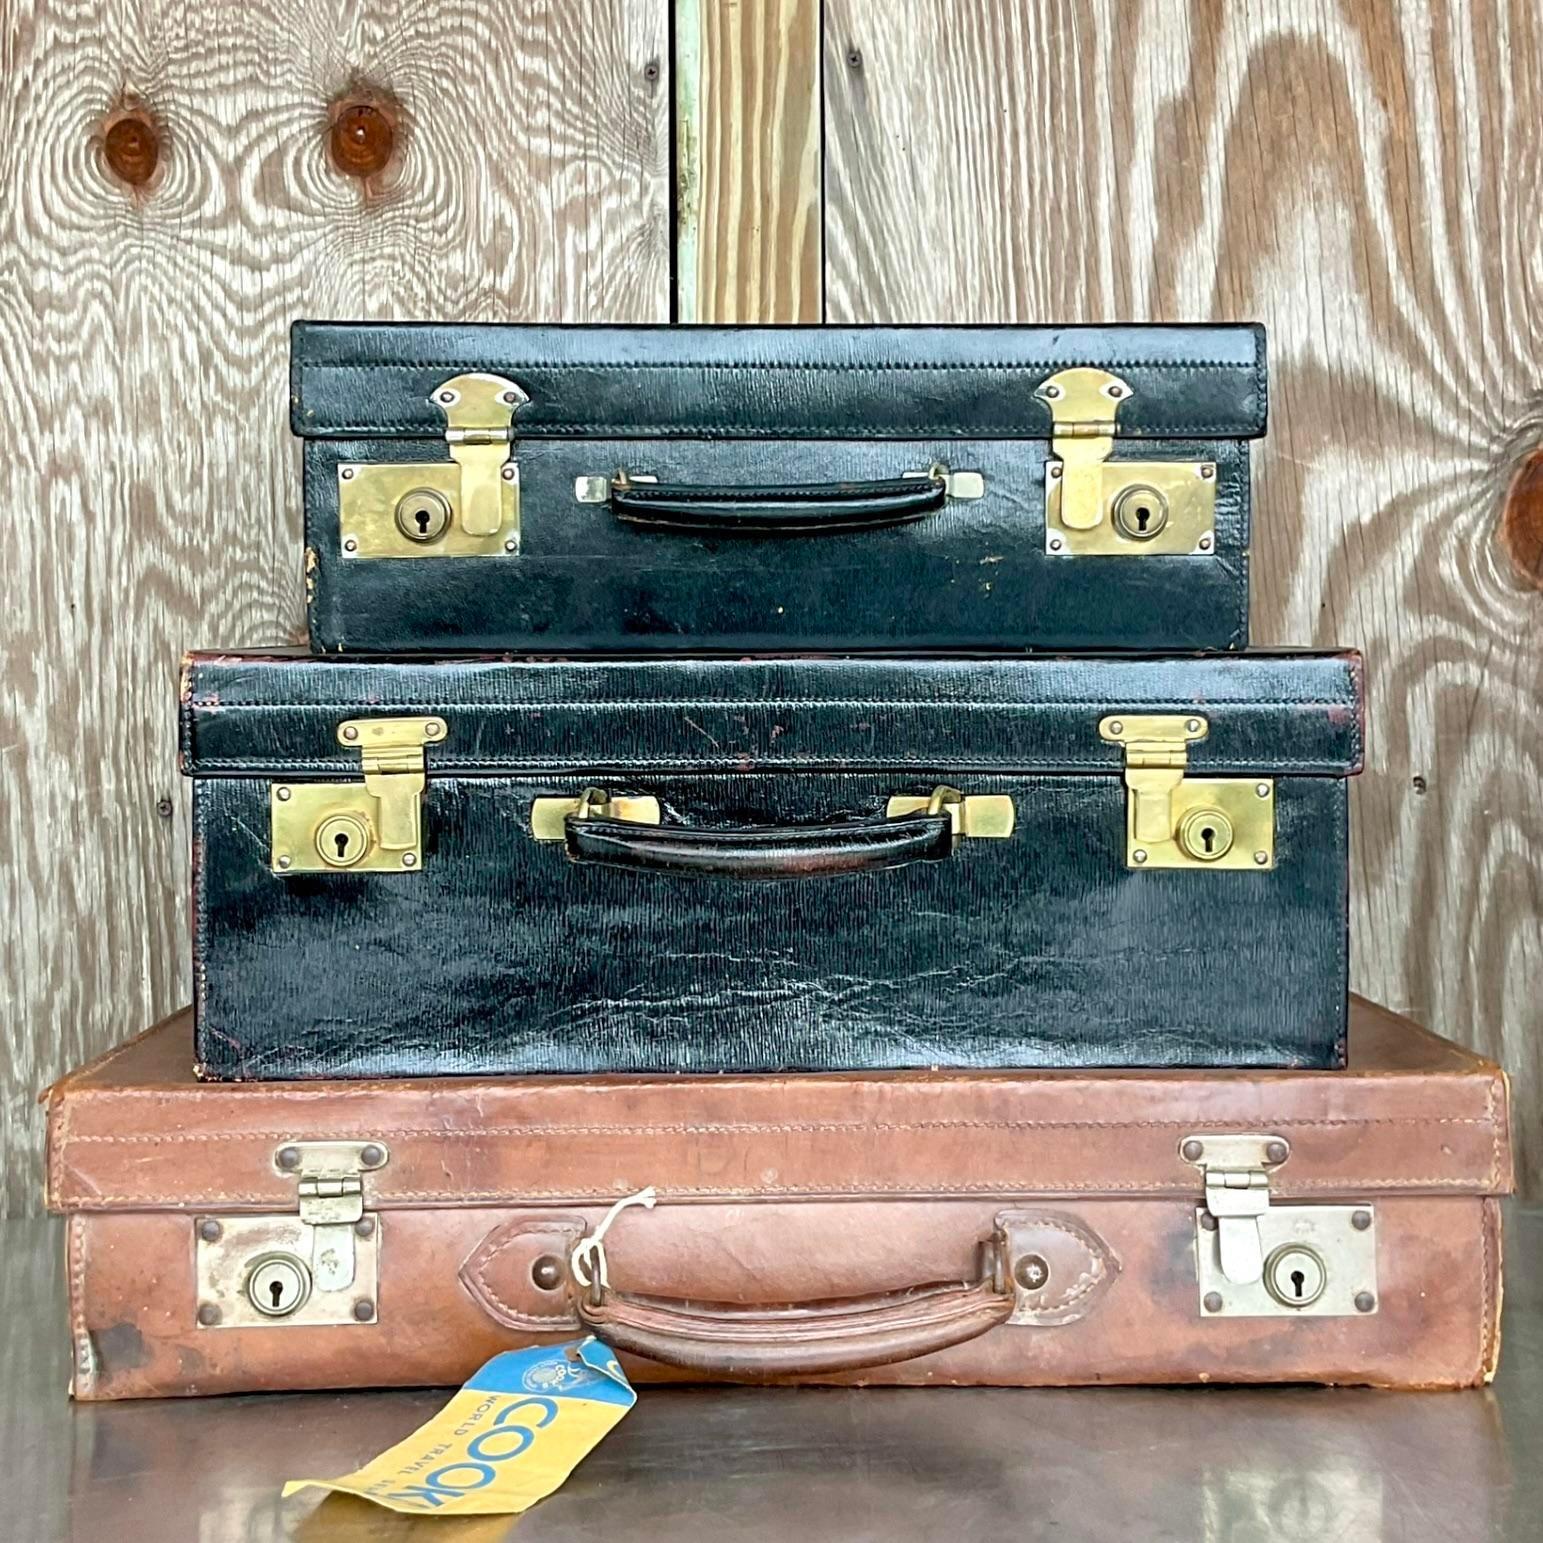 An incredible stack of chic vintage luggage. A beautiful set of three bags from a time gone by. Complete with vintage luggage tag. Perfect on top of your armoire, etagere or in your gentlemen’s dressing room. You decide! Acquired from a Palm Beach